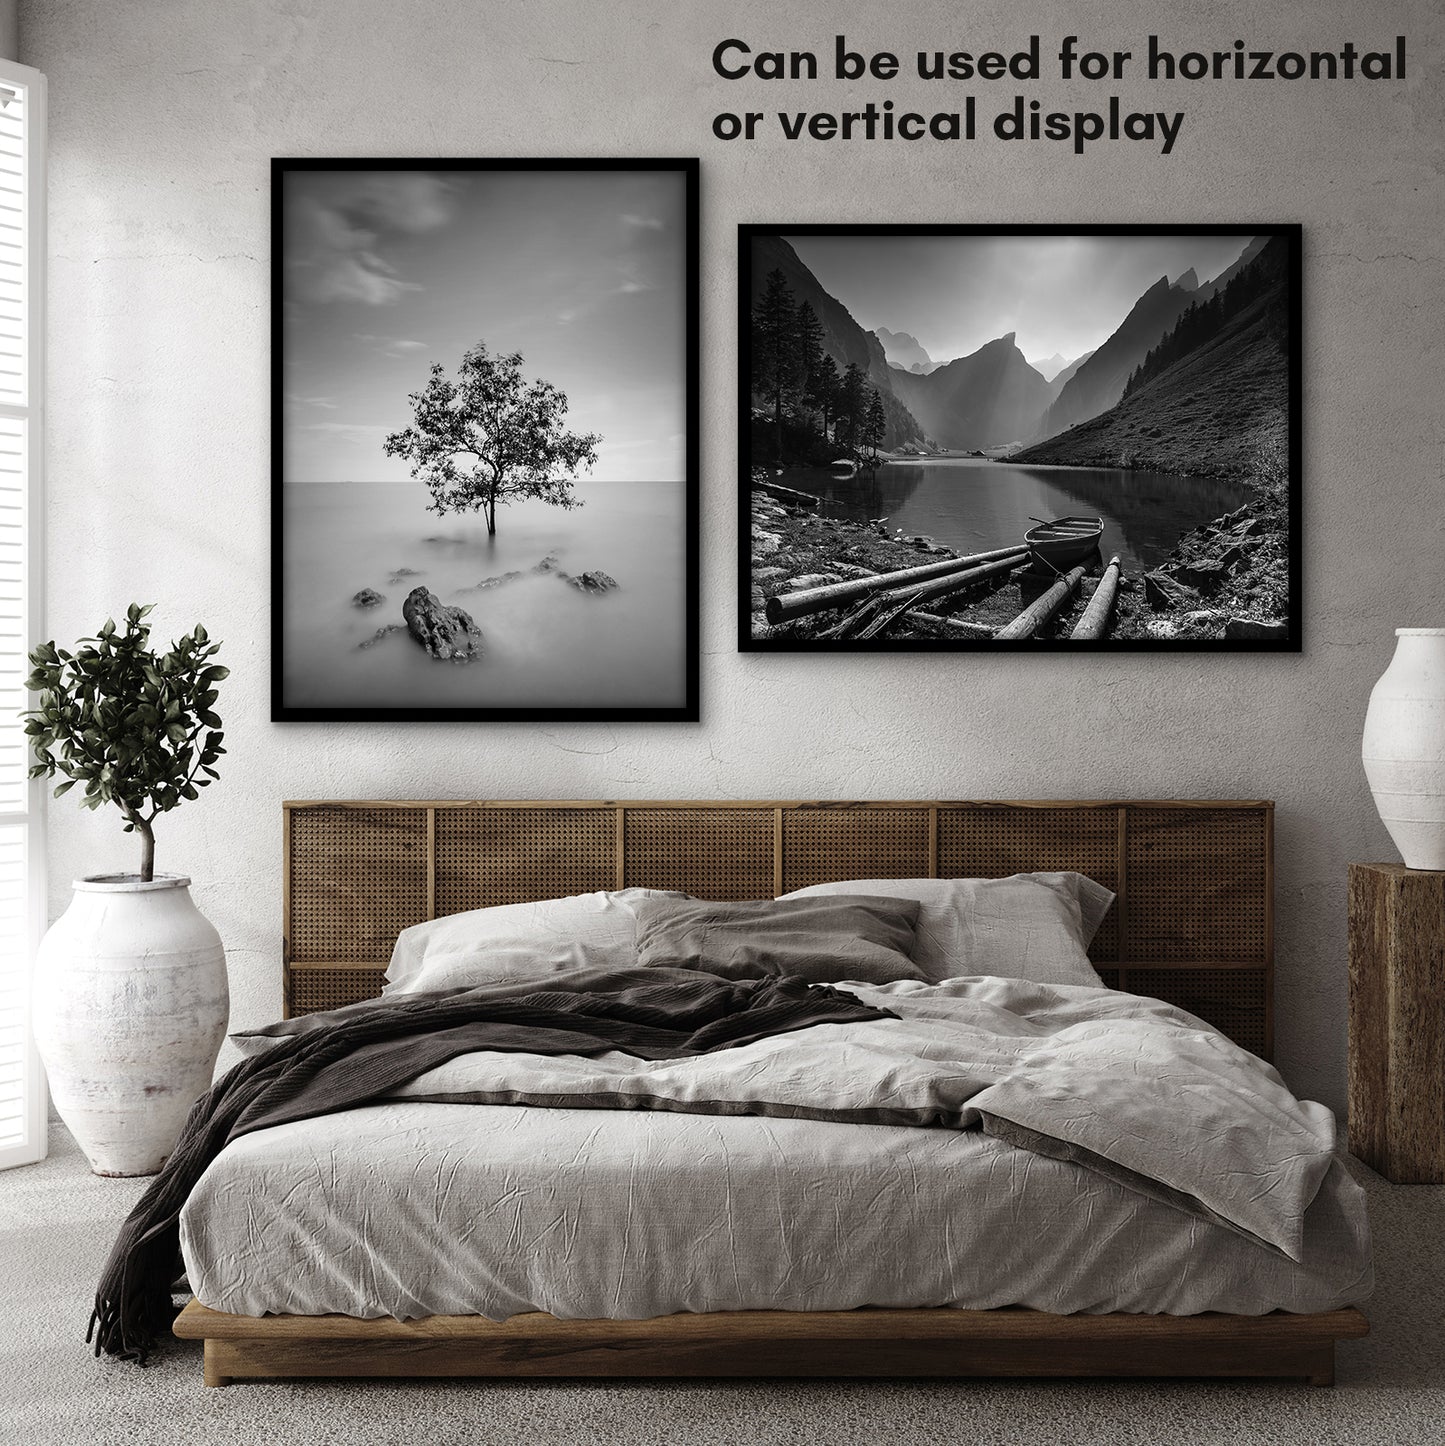 30x40 in Black - Wall with Hanging Hardware Included for Horizontal or Vertical Display Format - Picture Frame